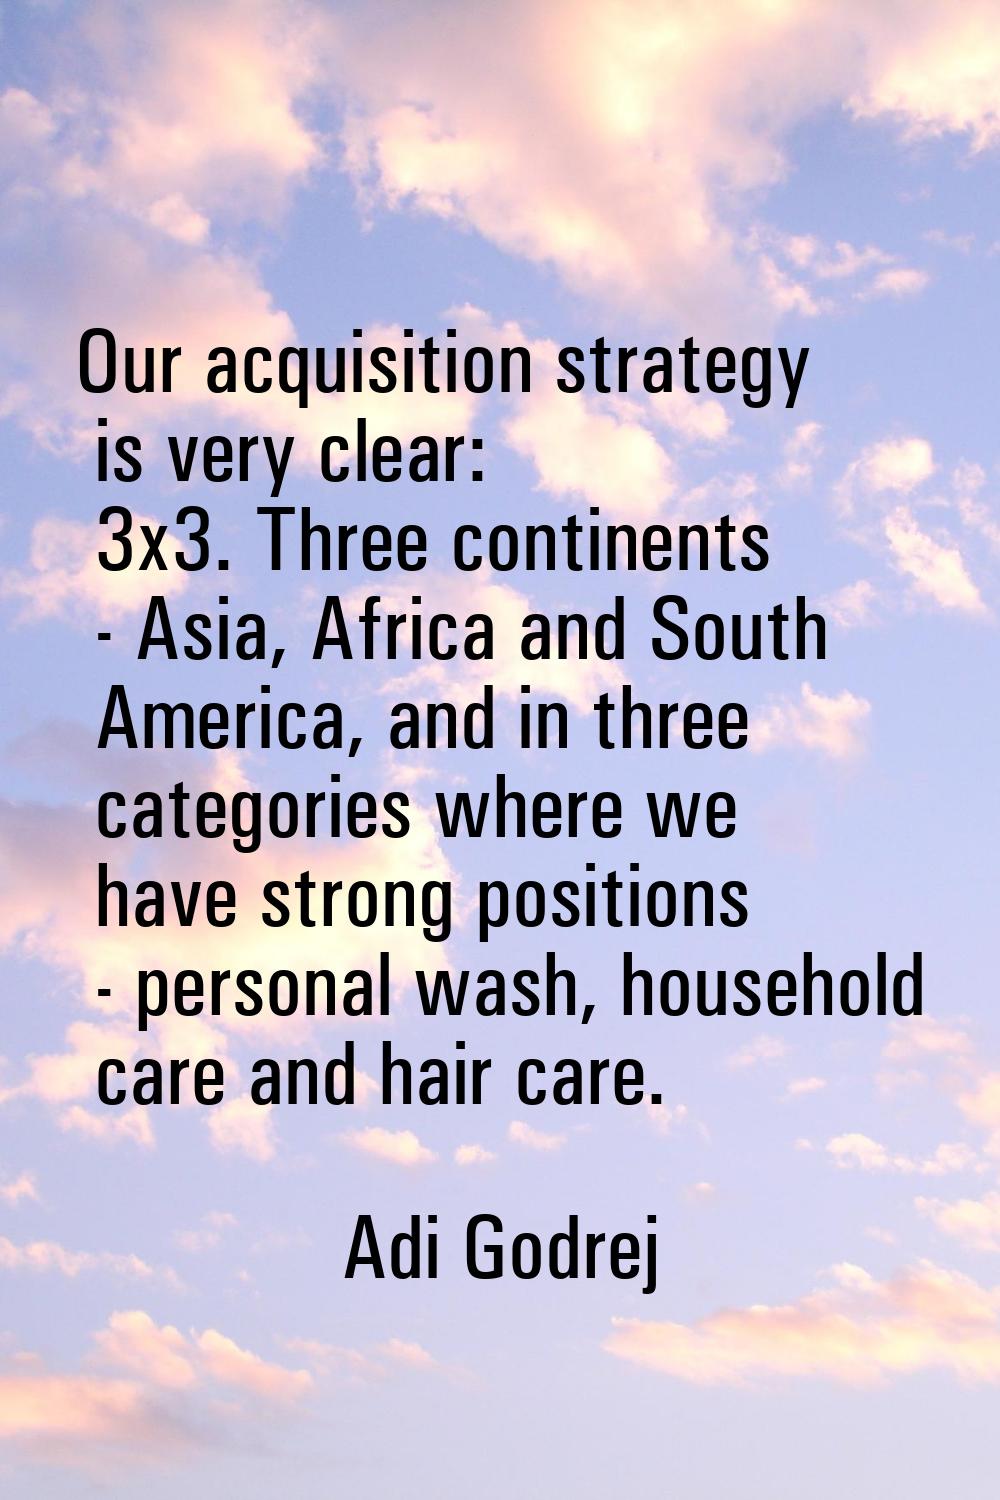 Our acquisition strategy is very clear: 3x3. Three continents - Asia, Africa and South America, and